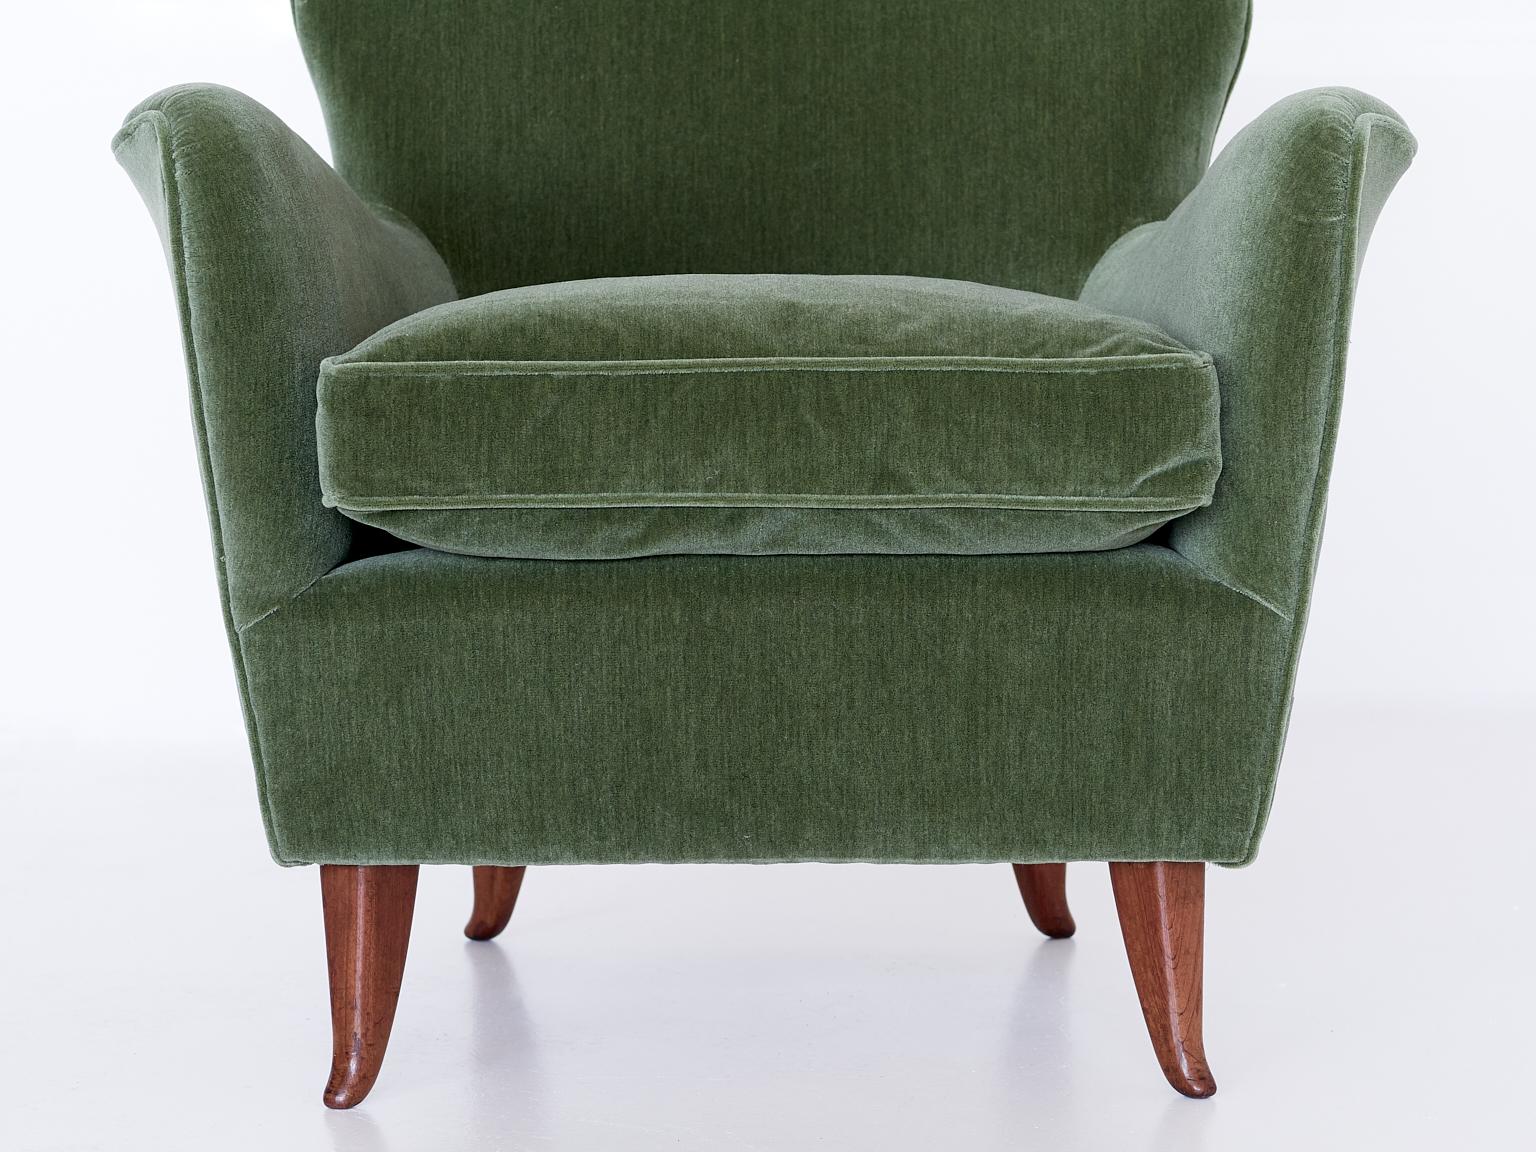 Gio Ponti Pair of Armchairs in Olive Green Velvet and Walnut, Italy, 1949 1